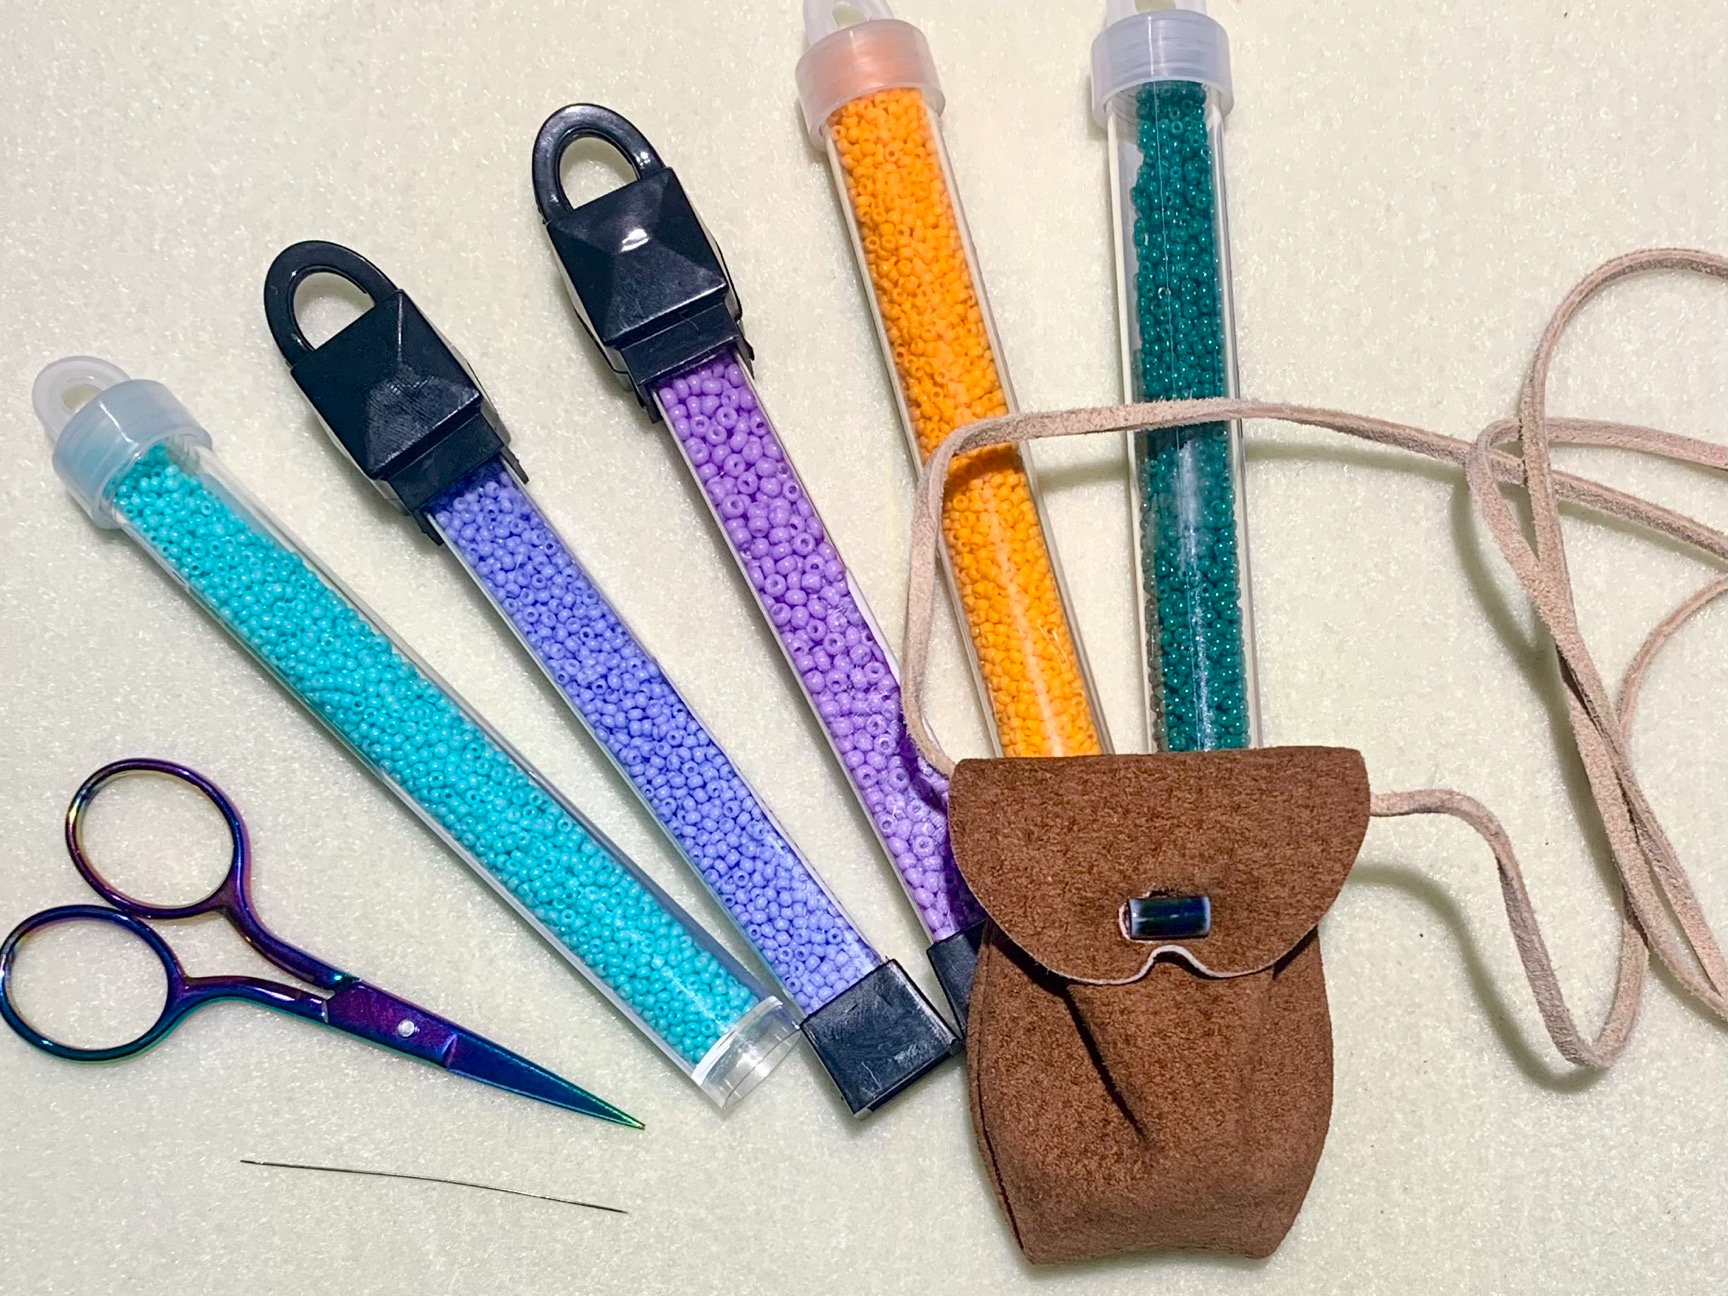 [ID: "Blue, purple, orange, and turquoise beads each in a cylindrical tube, a small pair of purple scissors, and a sewing needle surrounding a brown leather medicine bag. The background is a flat white surface."]